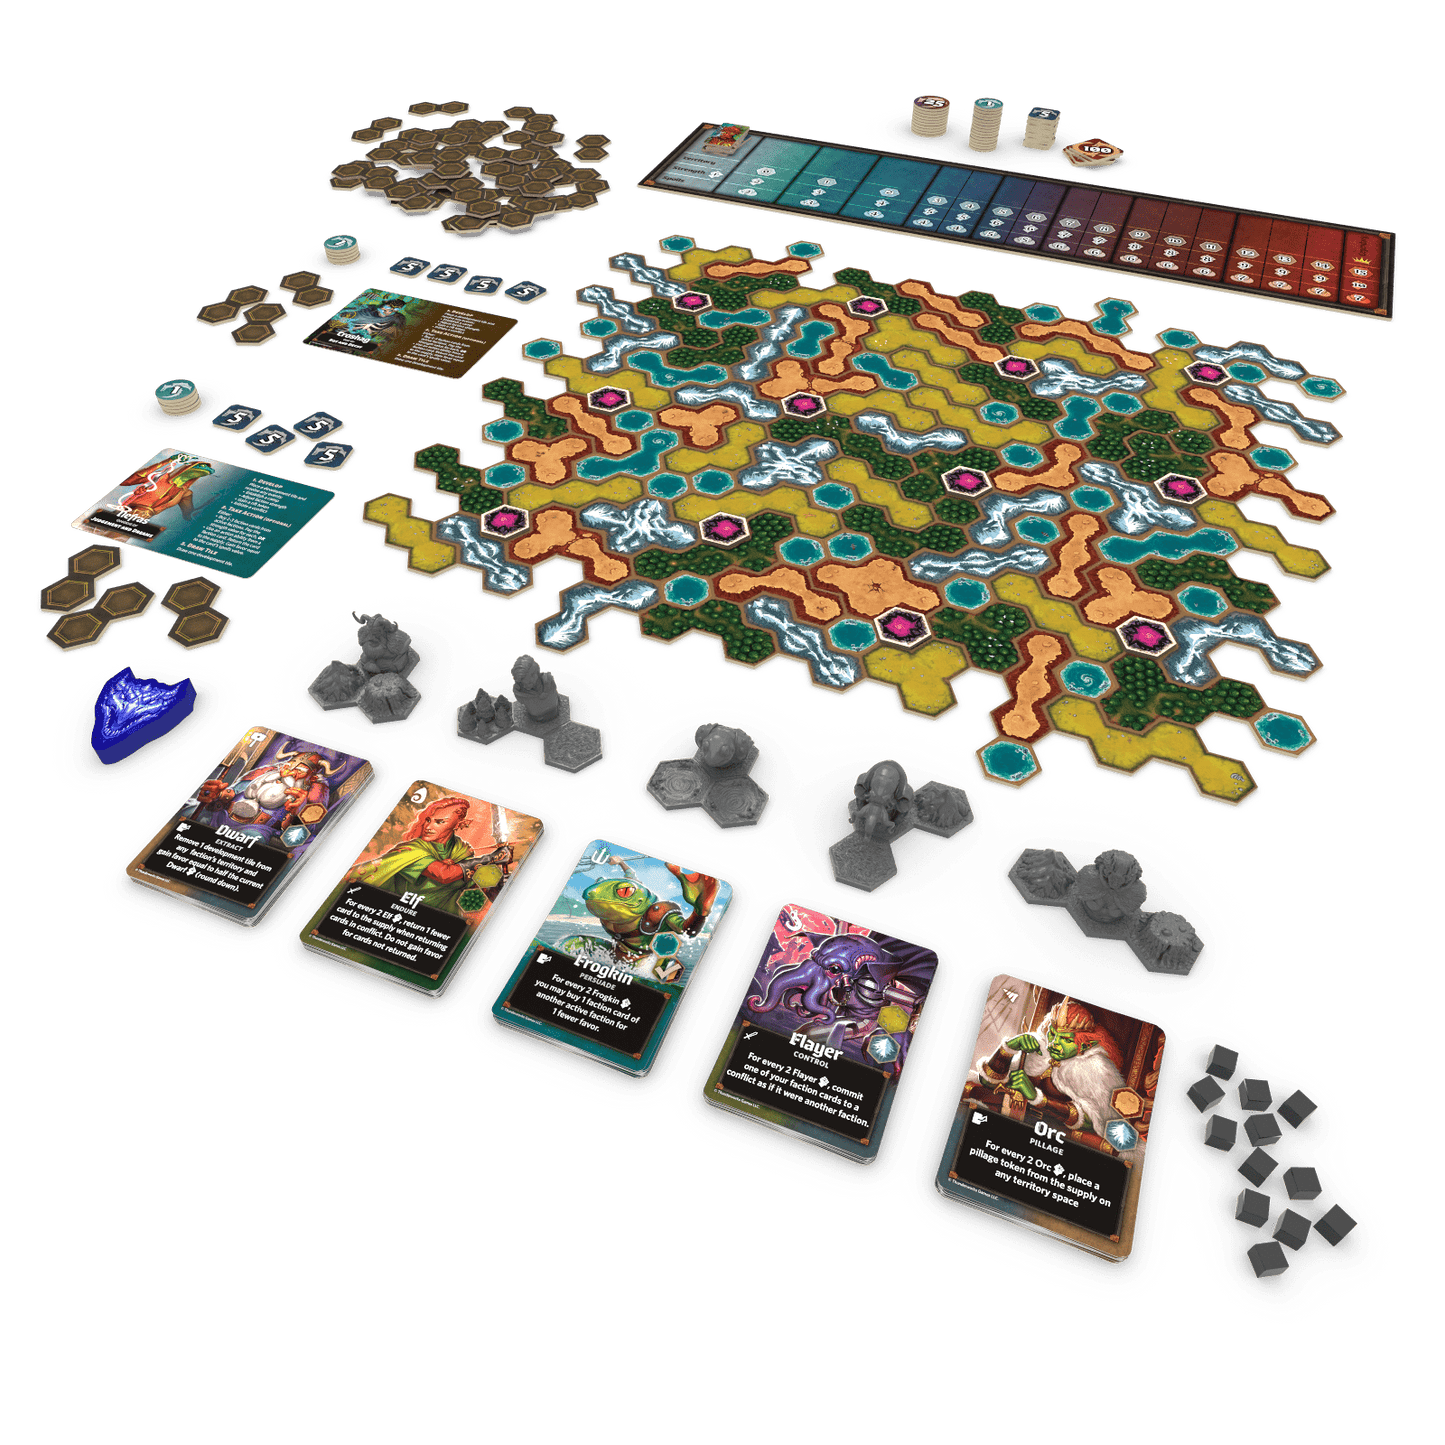 Dawn of Ulos + Stretch Goals+ KS Exclusives English